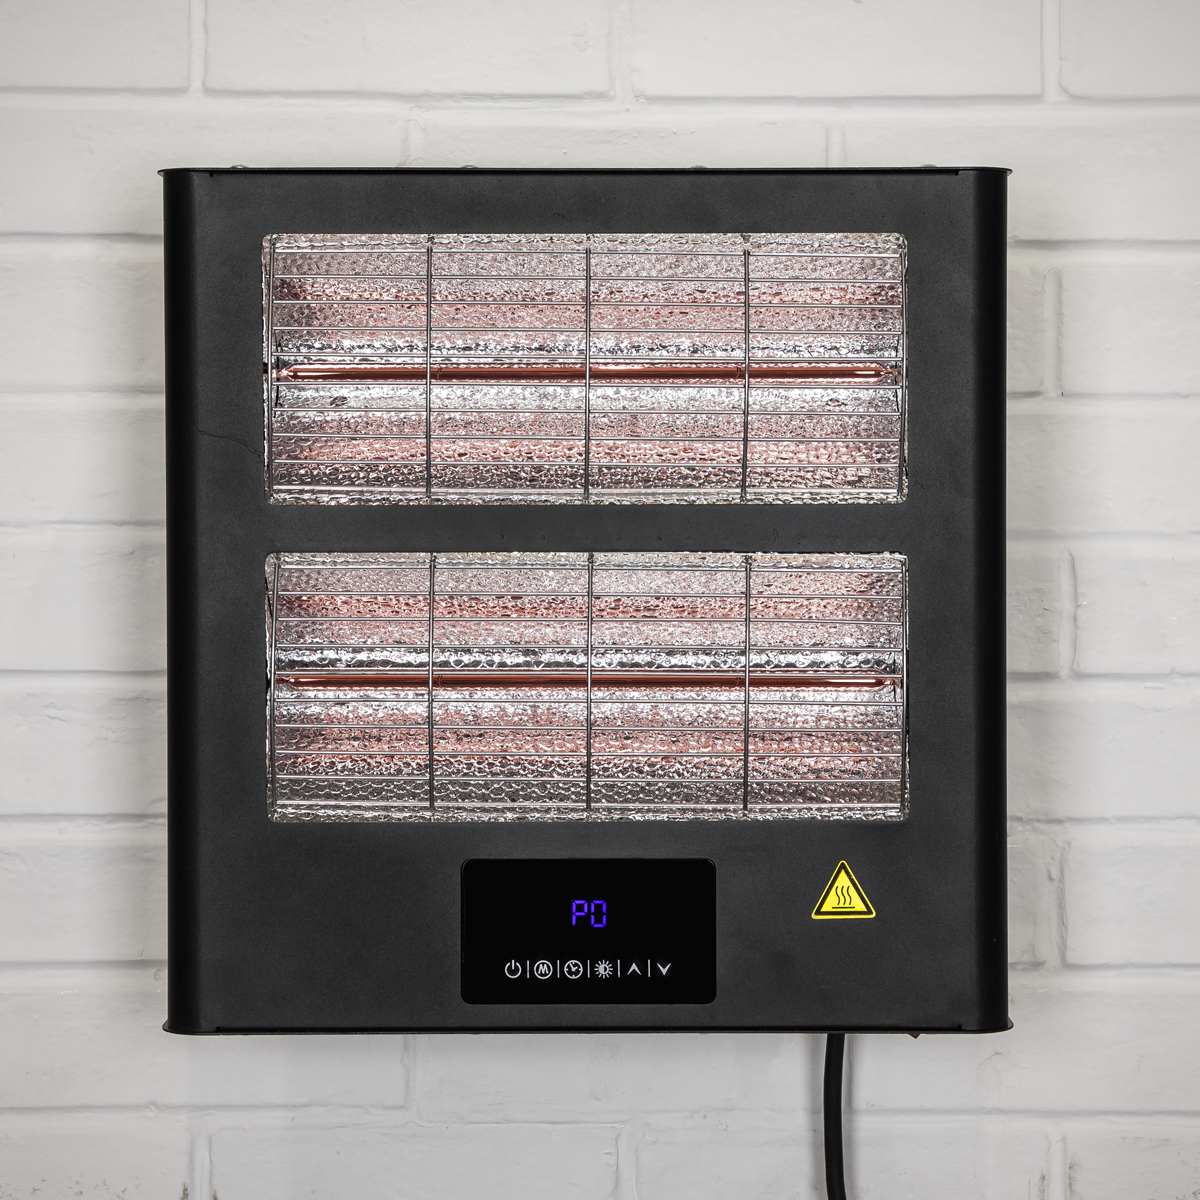 Infrared Quartz Heater - Wall Mounting 2.8kW/230V